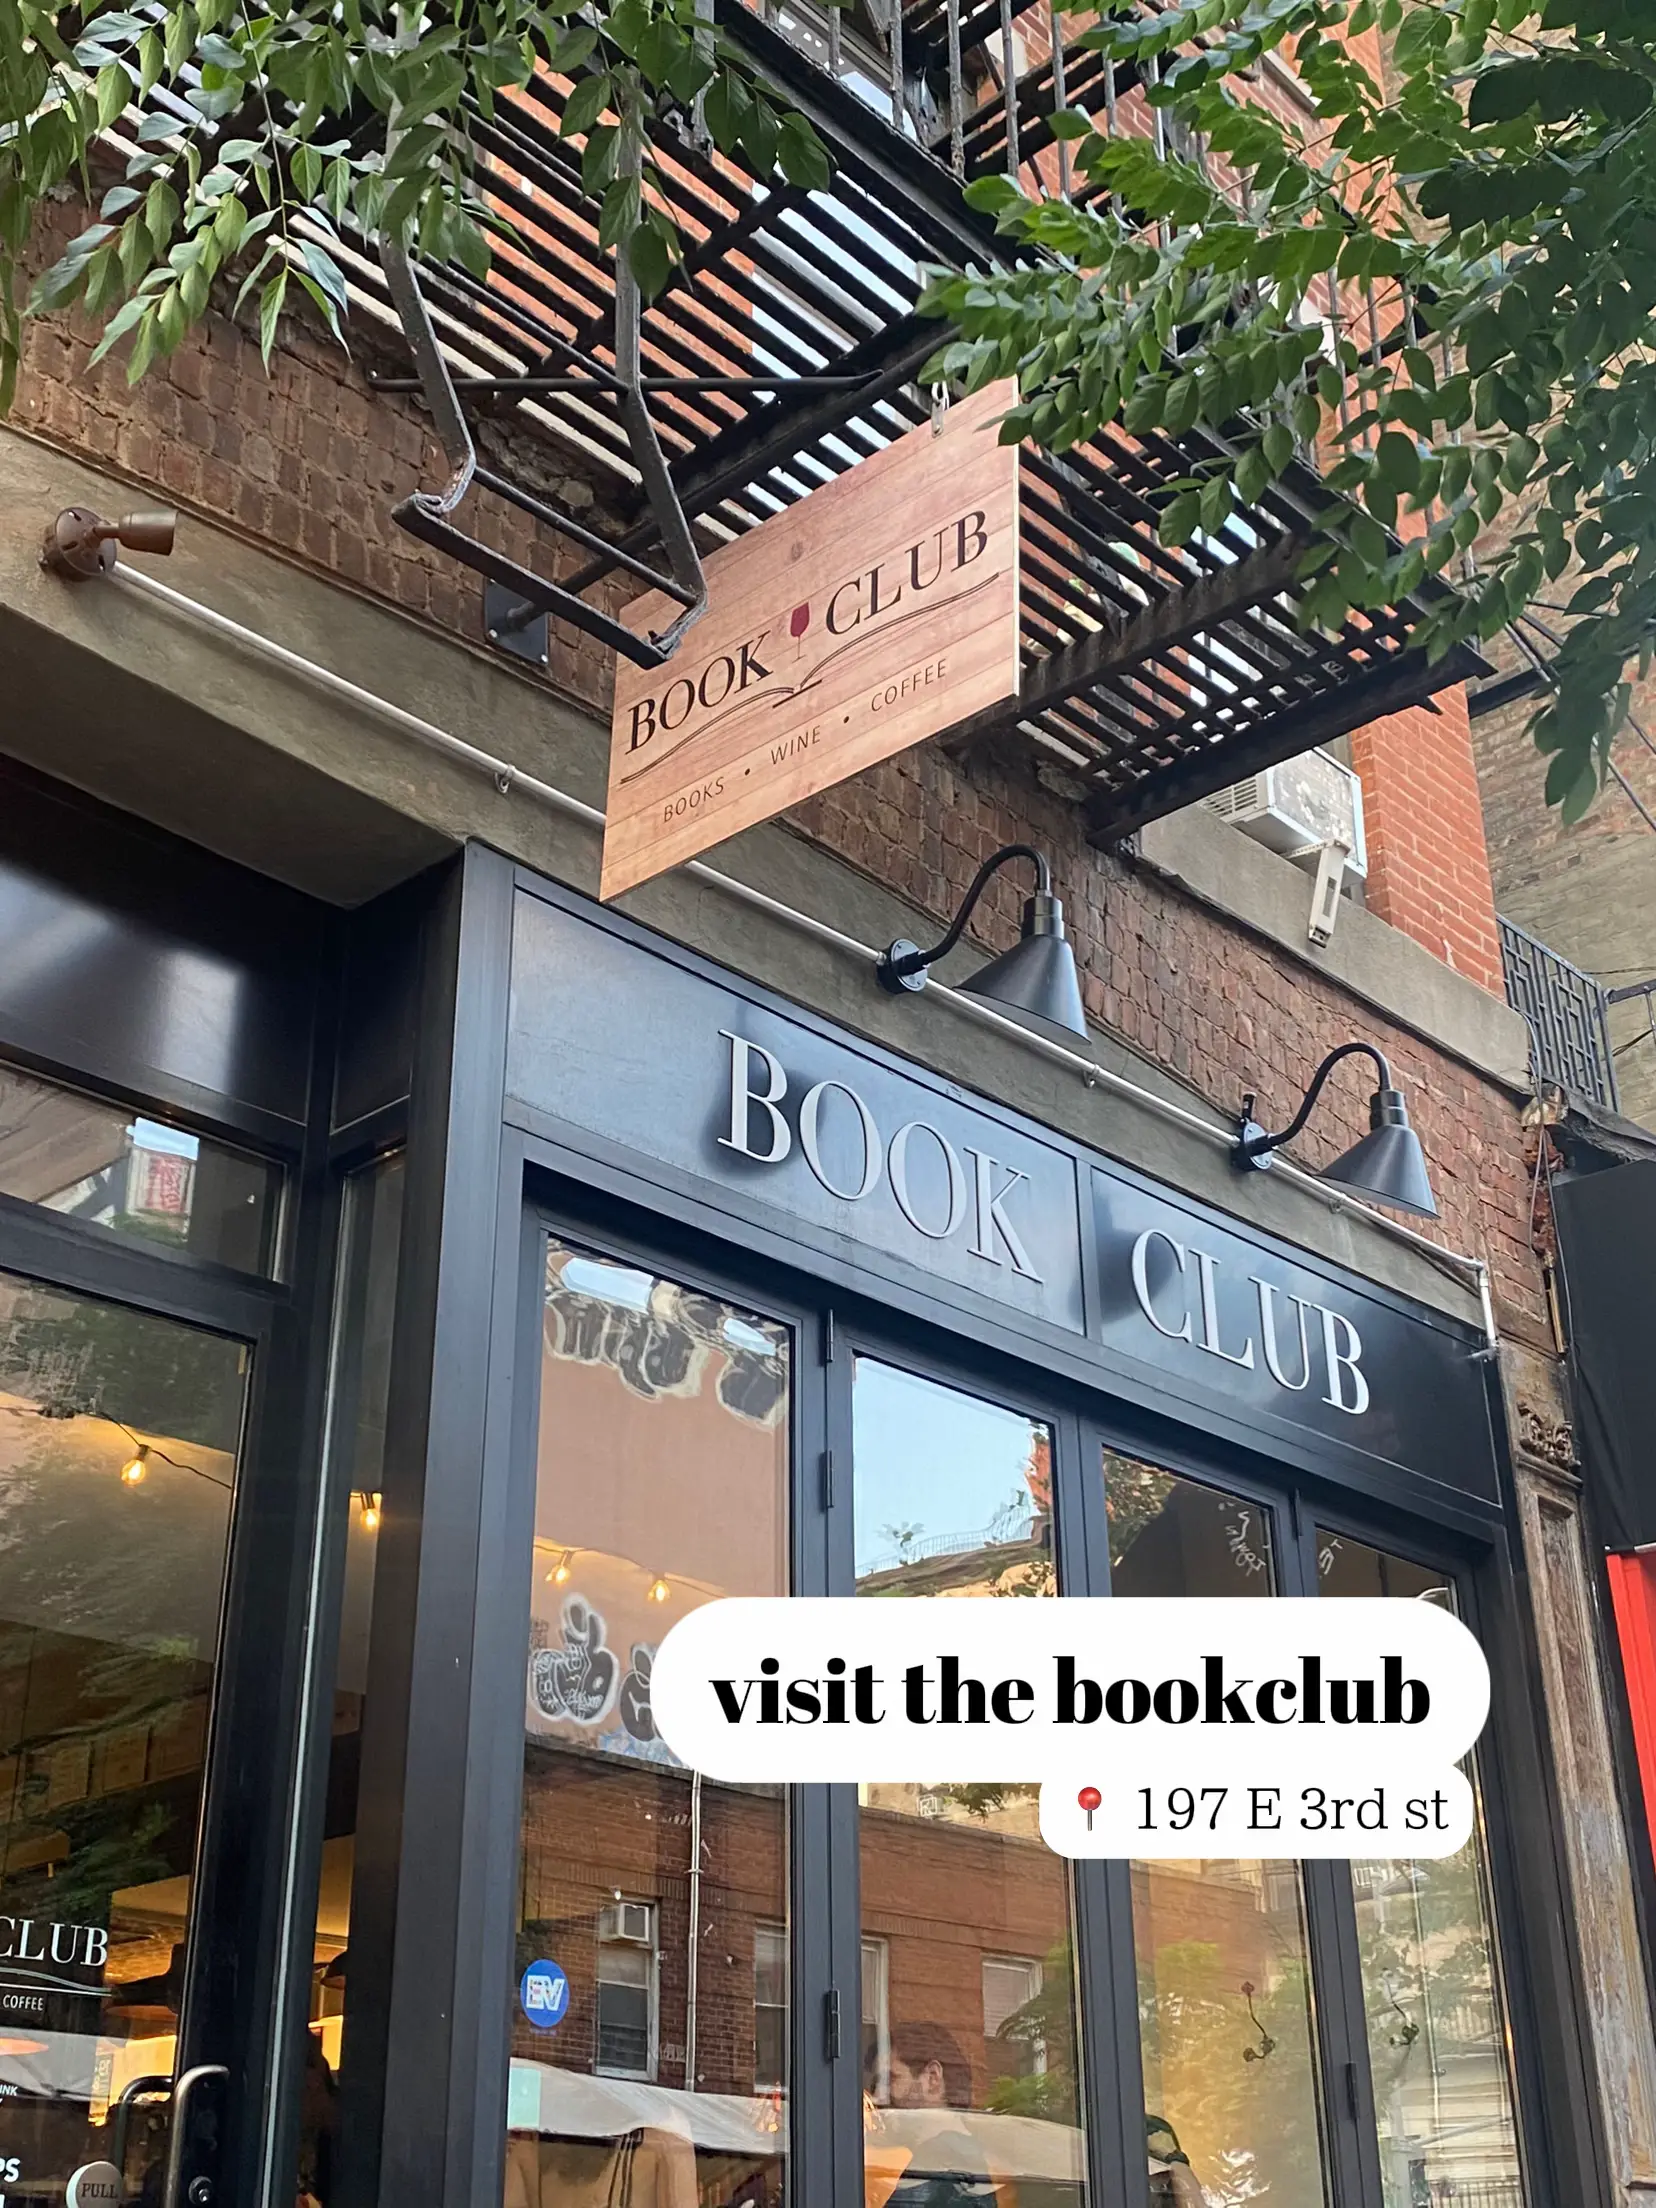  A storefront with a sign that says "visit the bookclub".